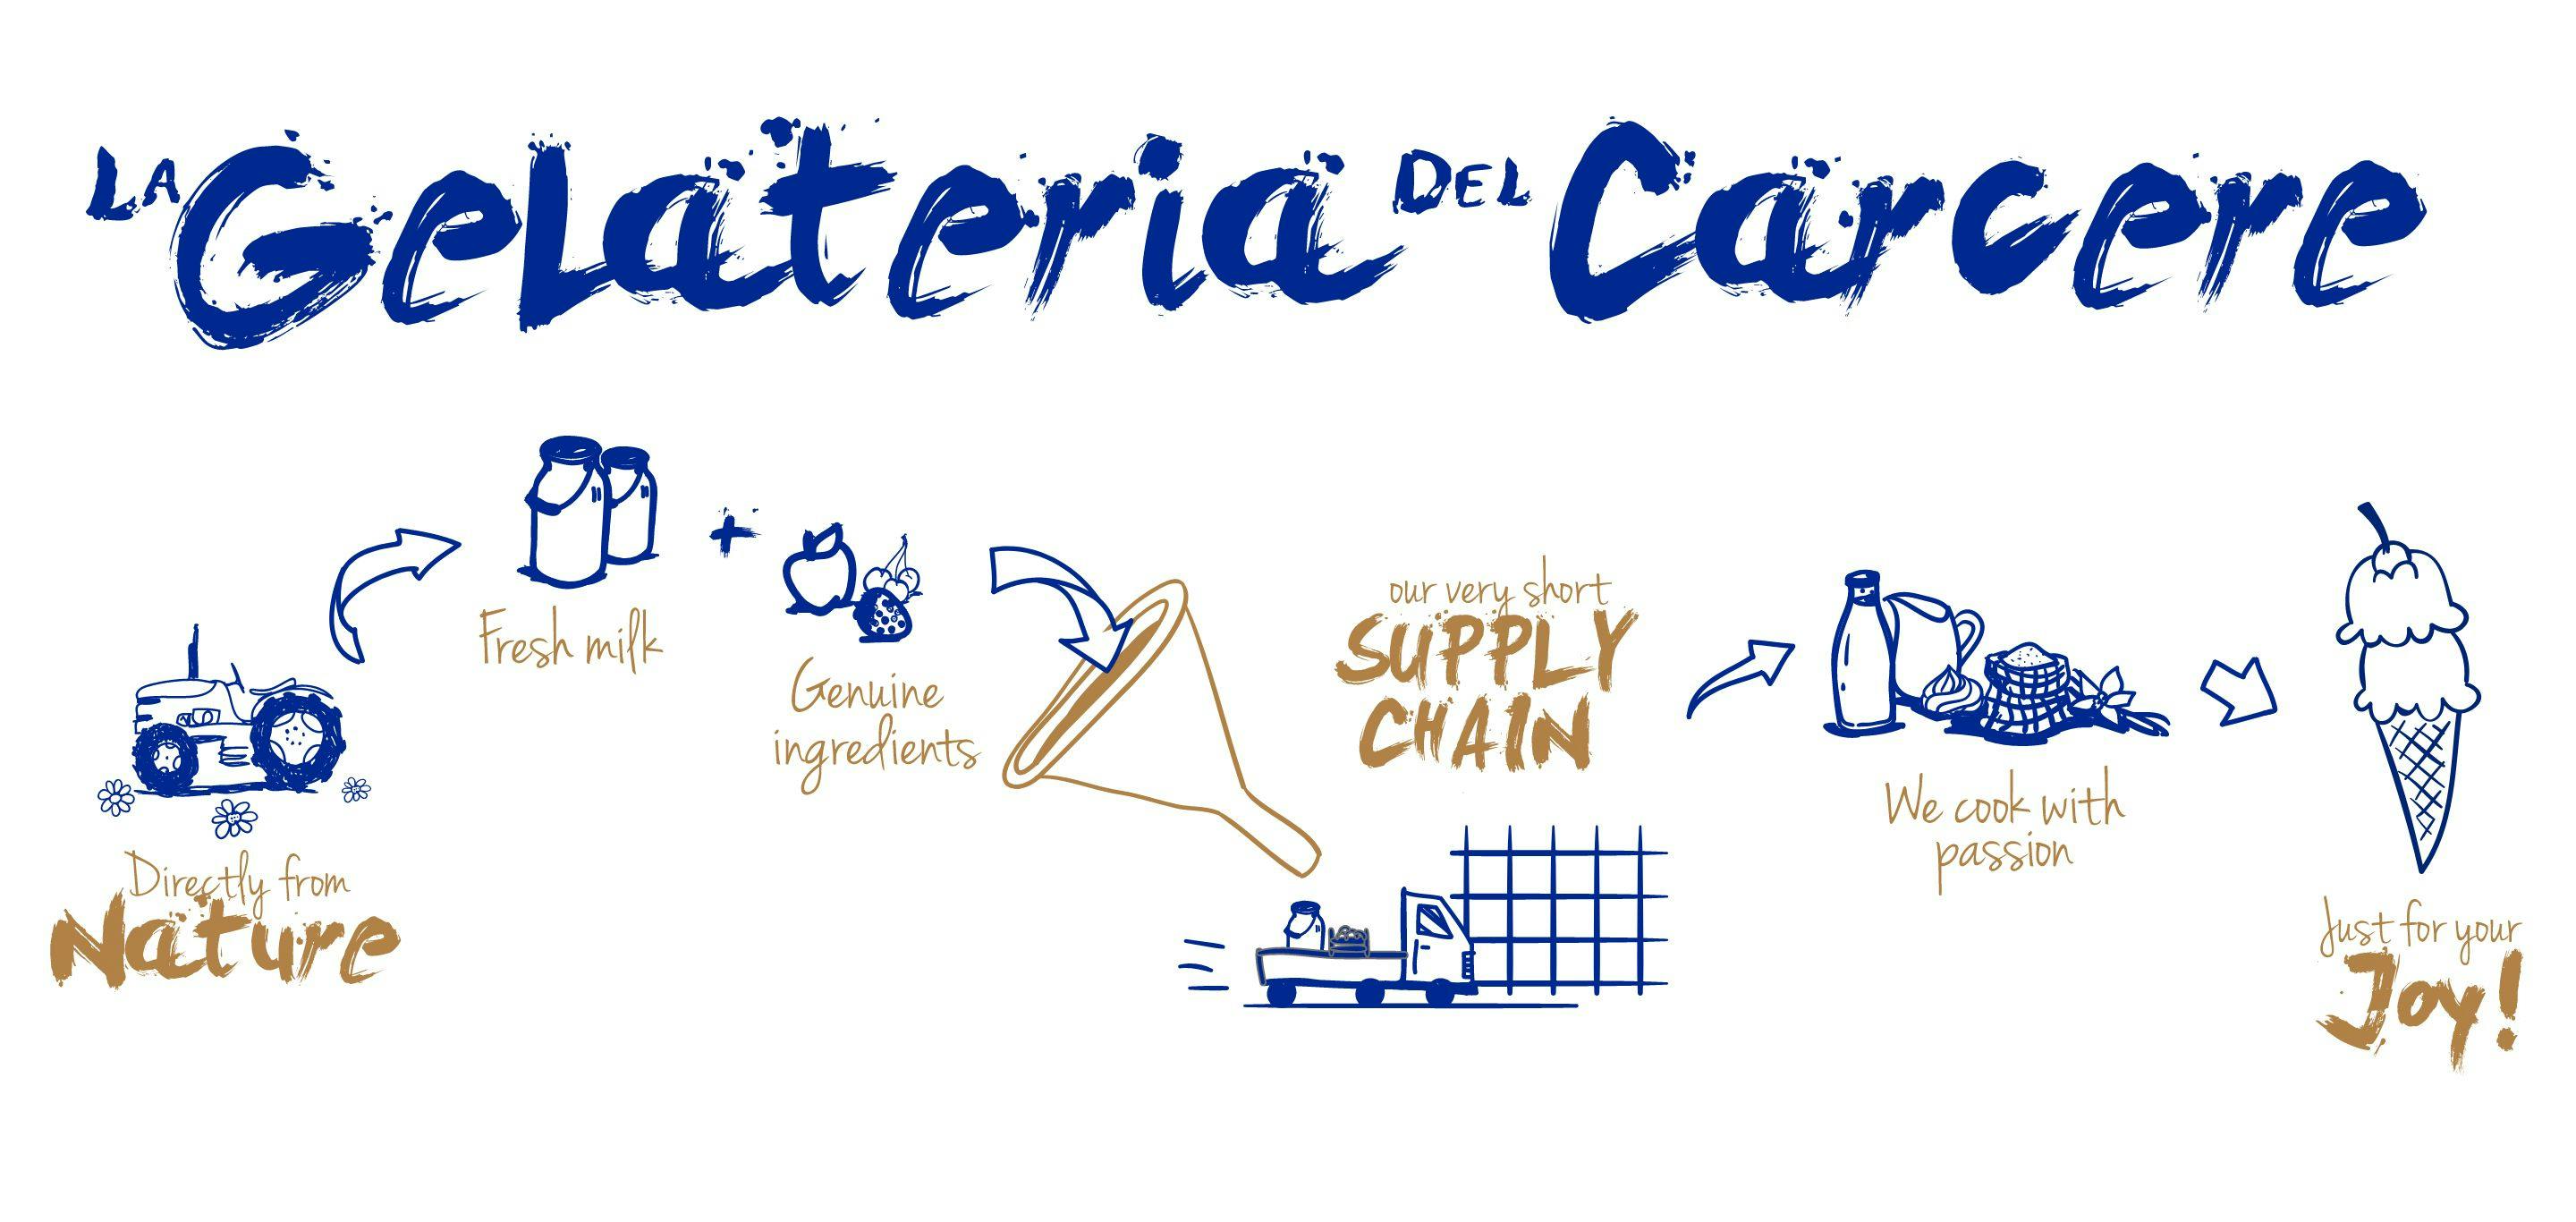 Gelateria Giotto icons and ice cream supply chain